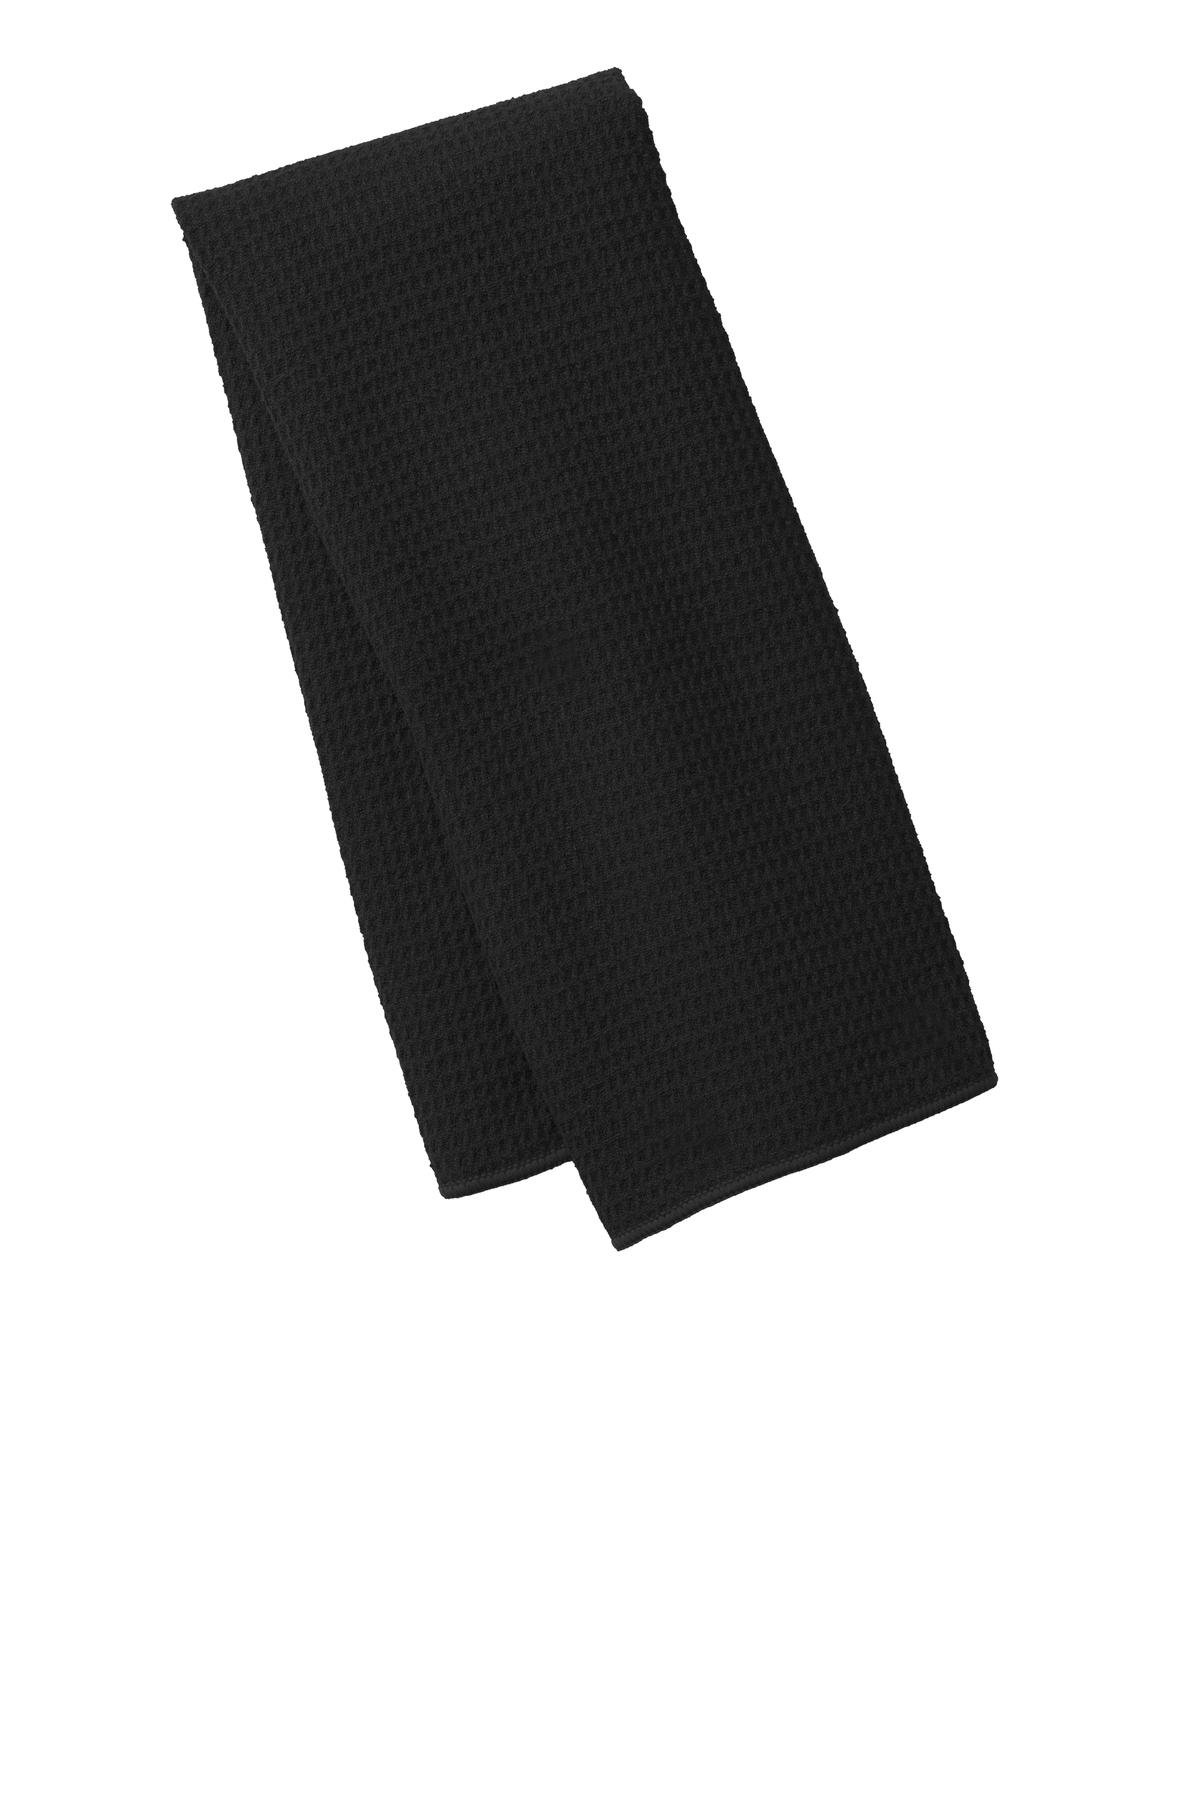 Port Authority Corporate Hospitality Accessories ® Waffle Microfiber Fitness Towel.-Port Authority